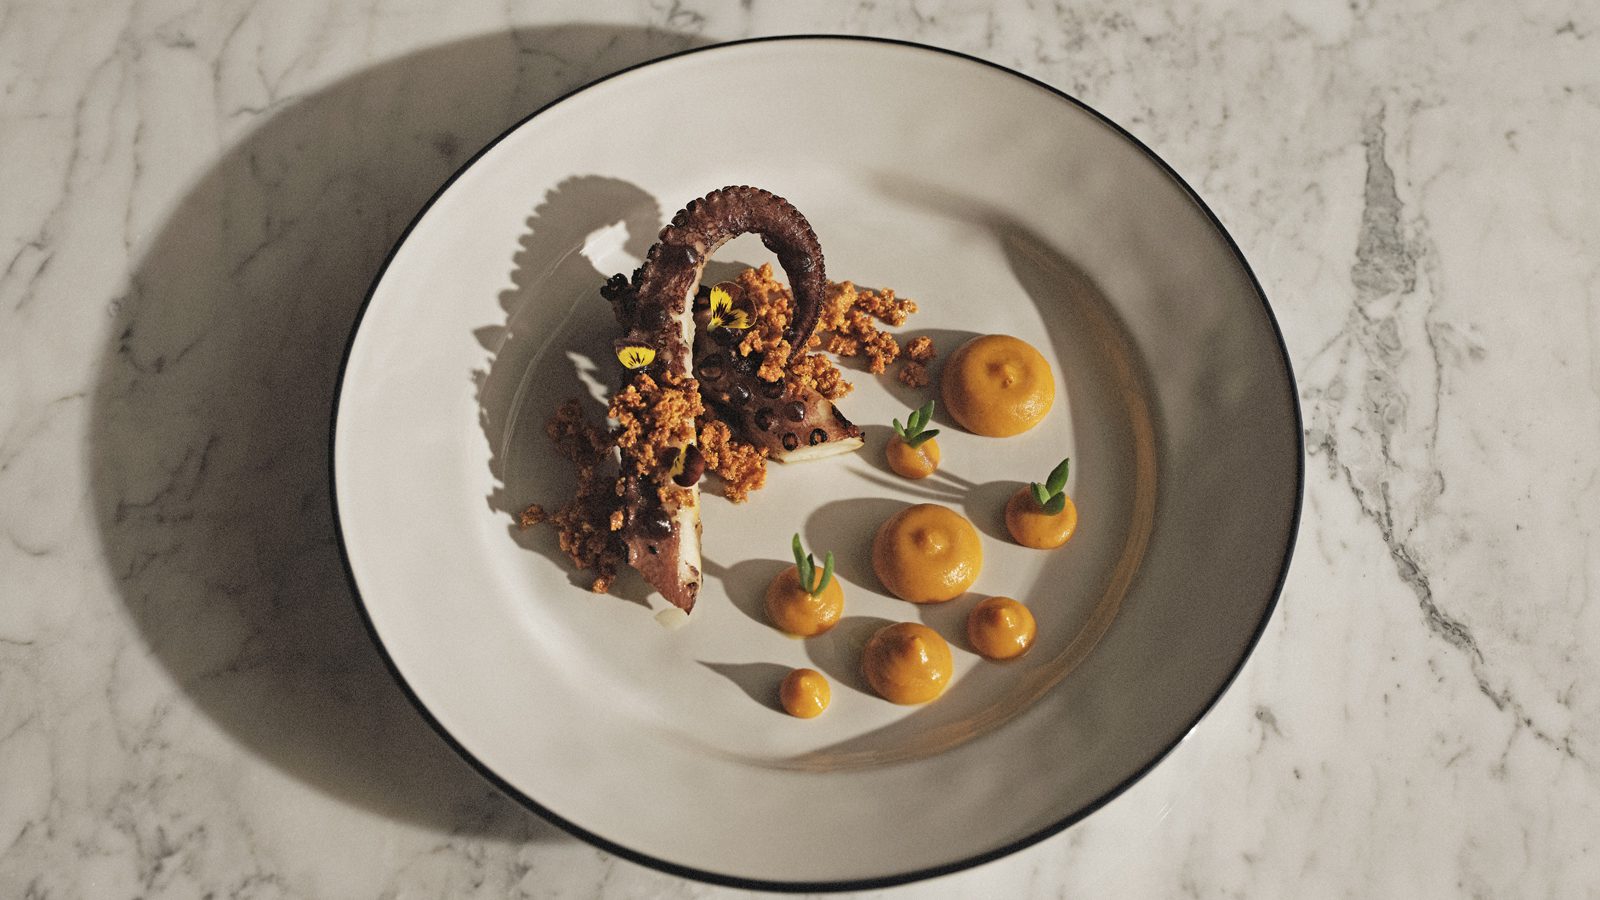 OLIVE WOOD SMOKED OCTOPUS (GF) Vadouvan Carrot Puree, Carrot Crumble